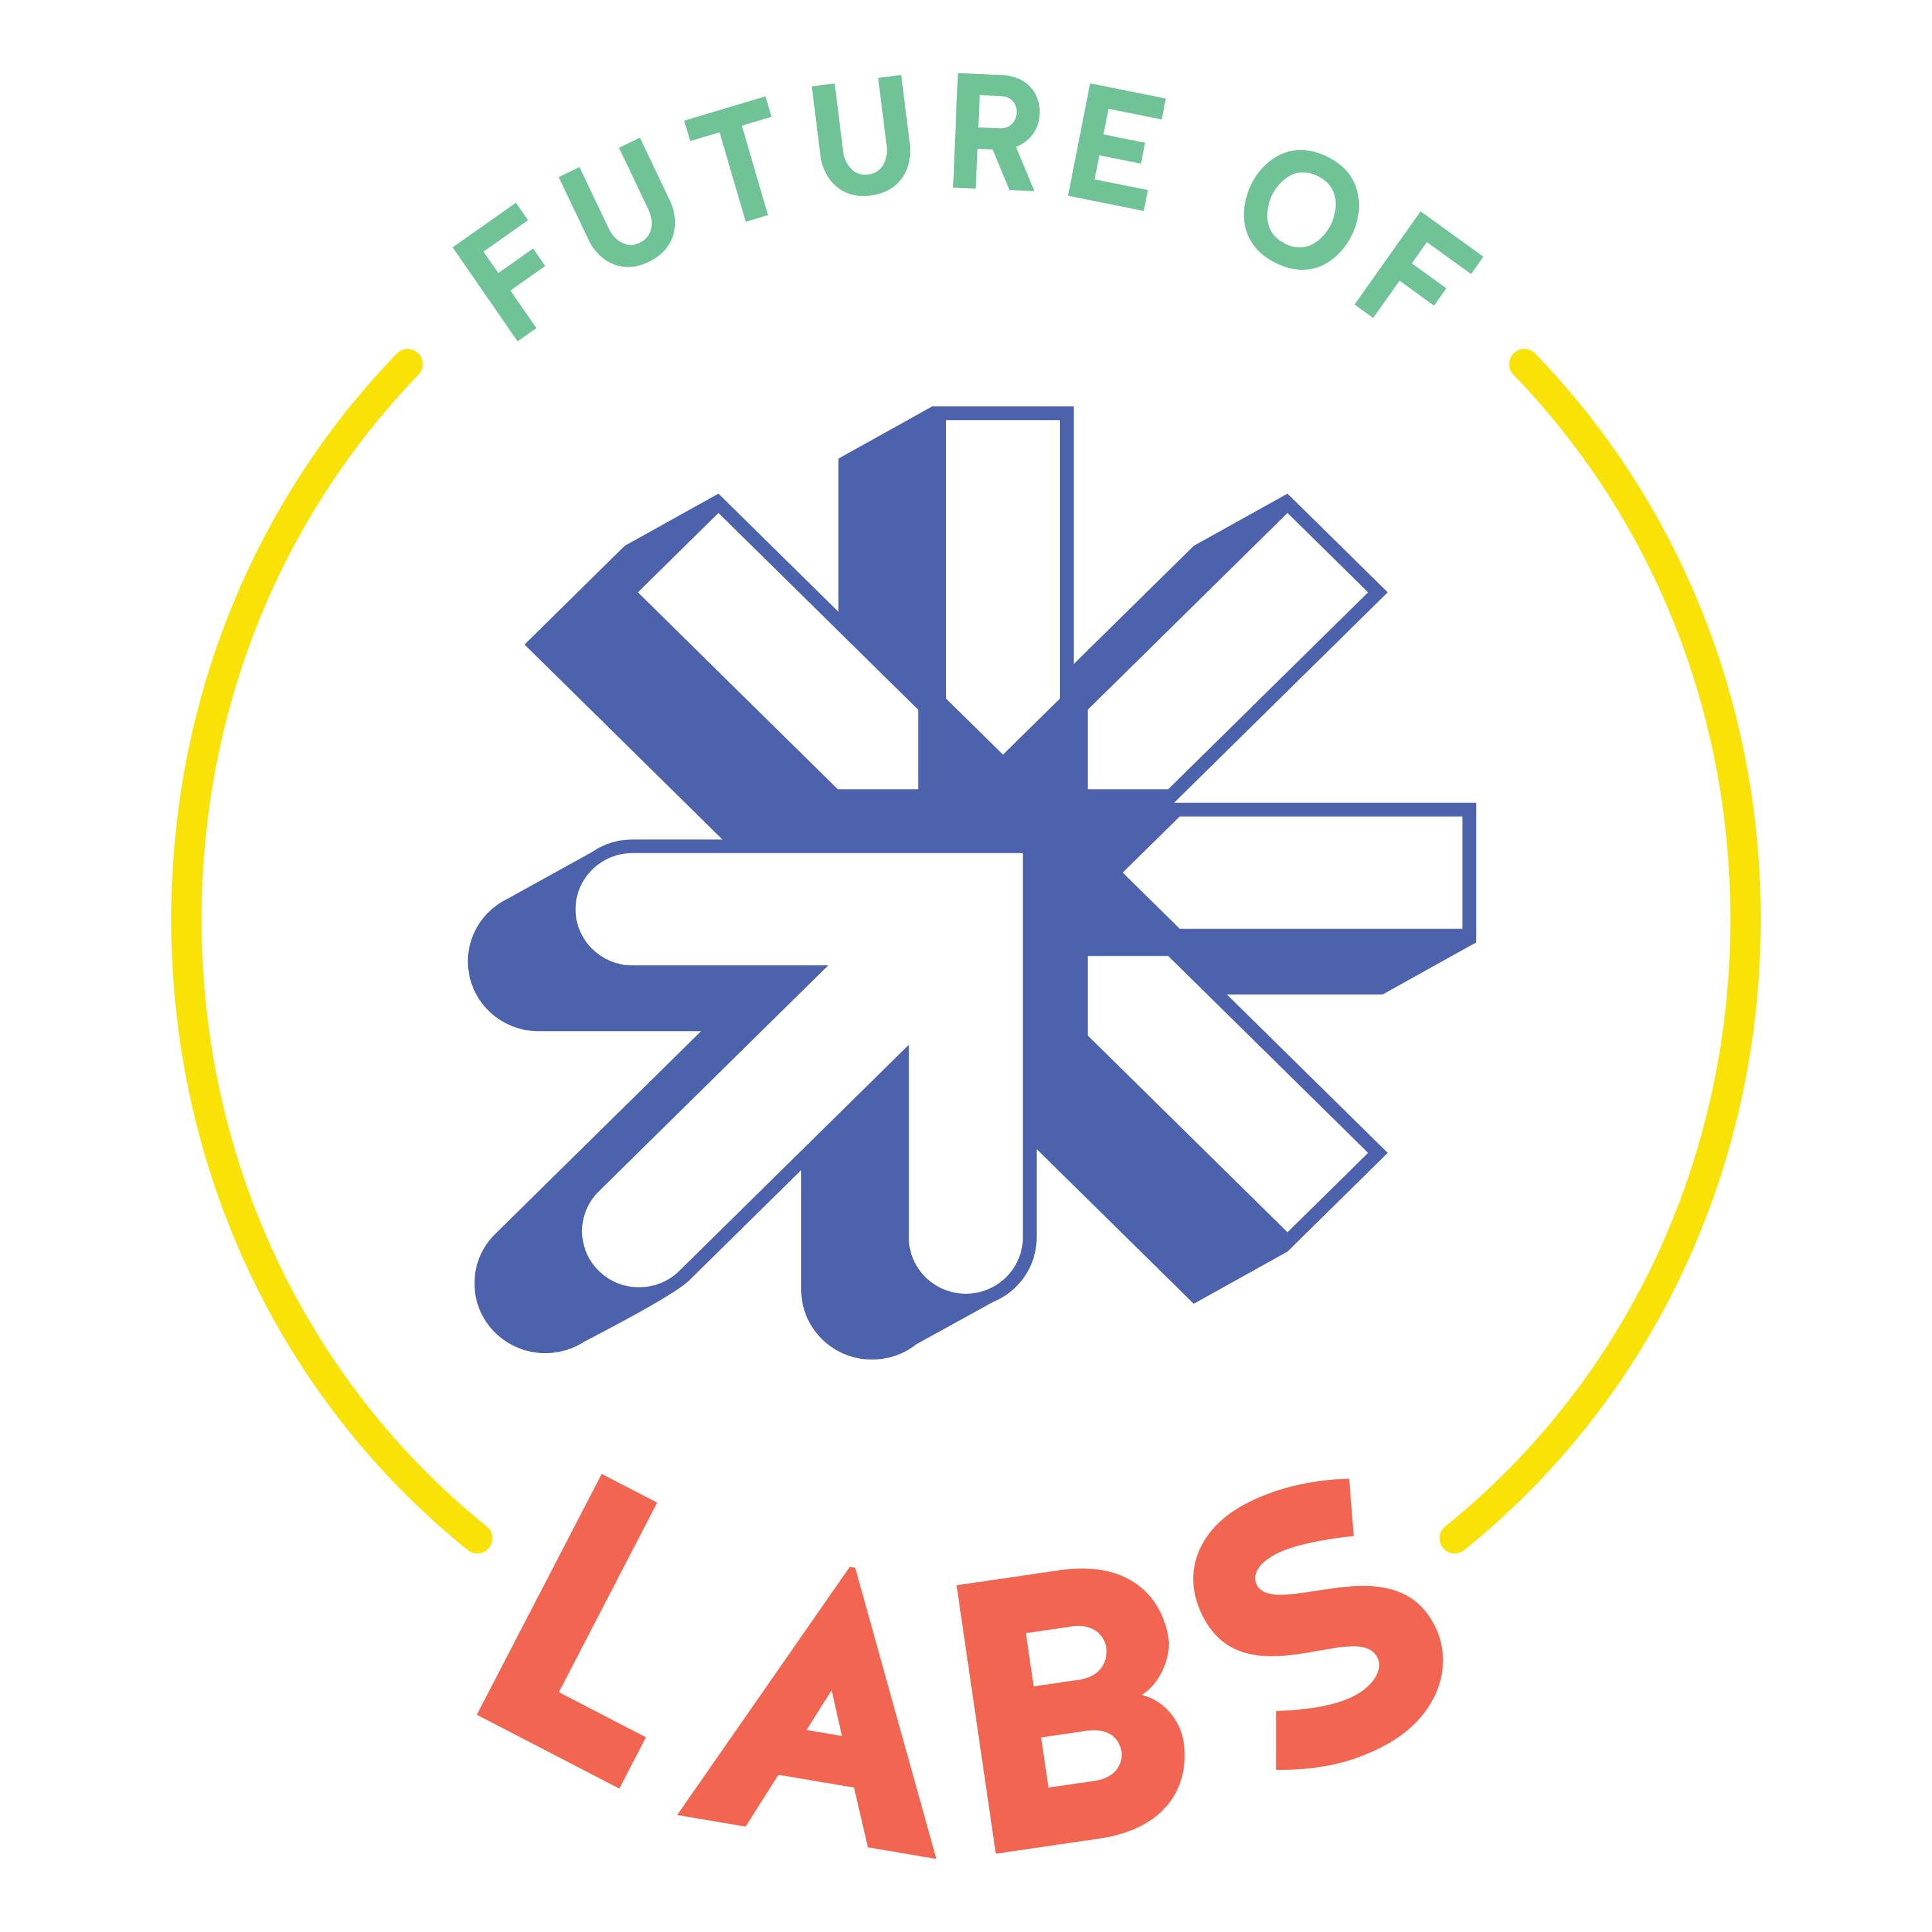 The Future of Labs - Before